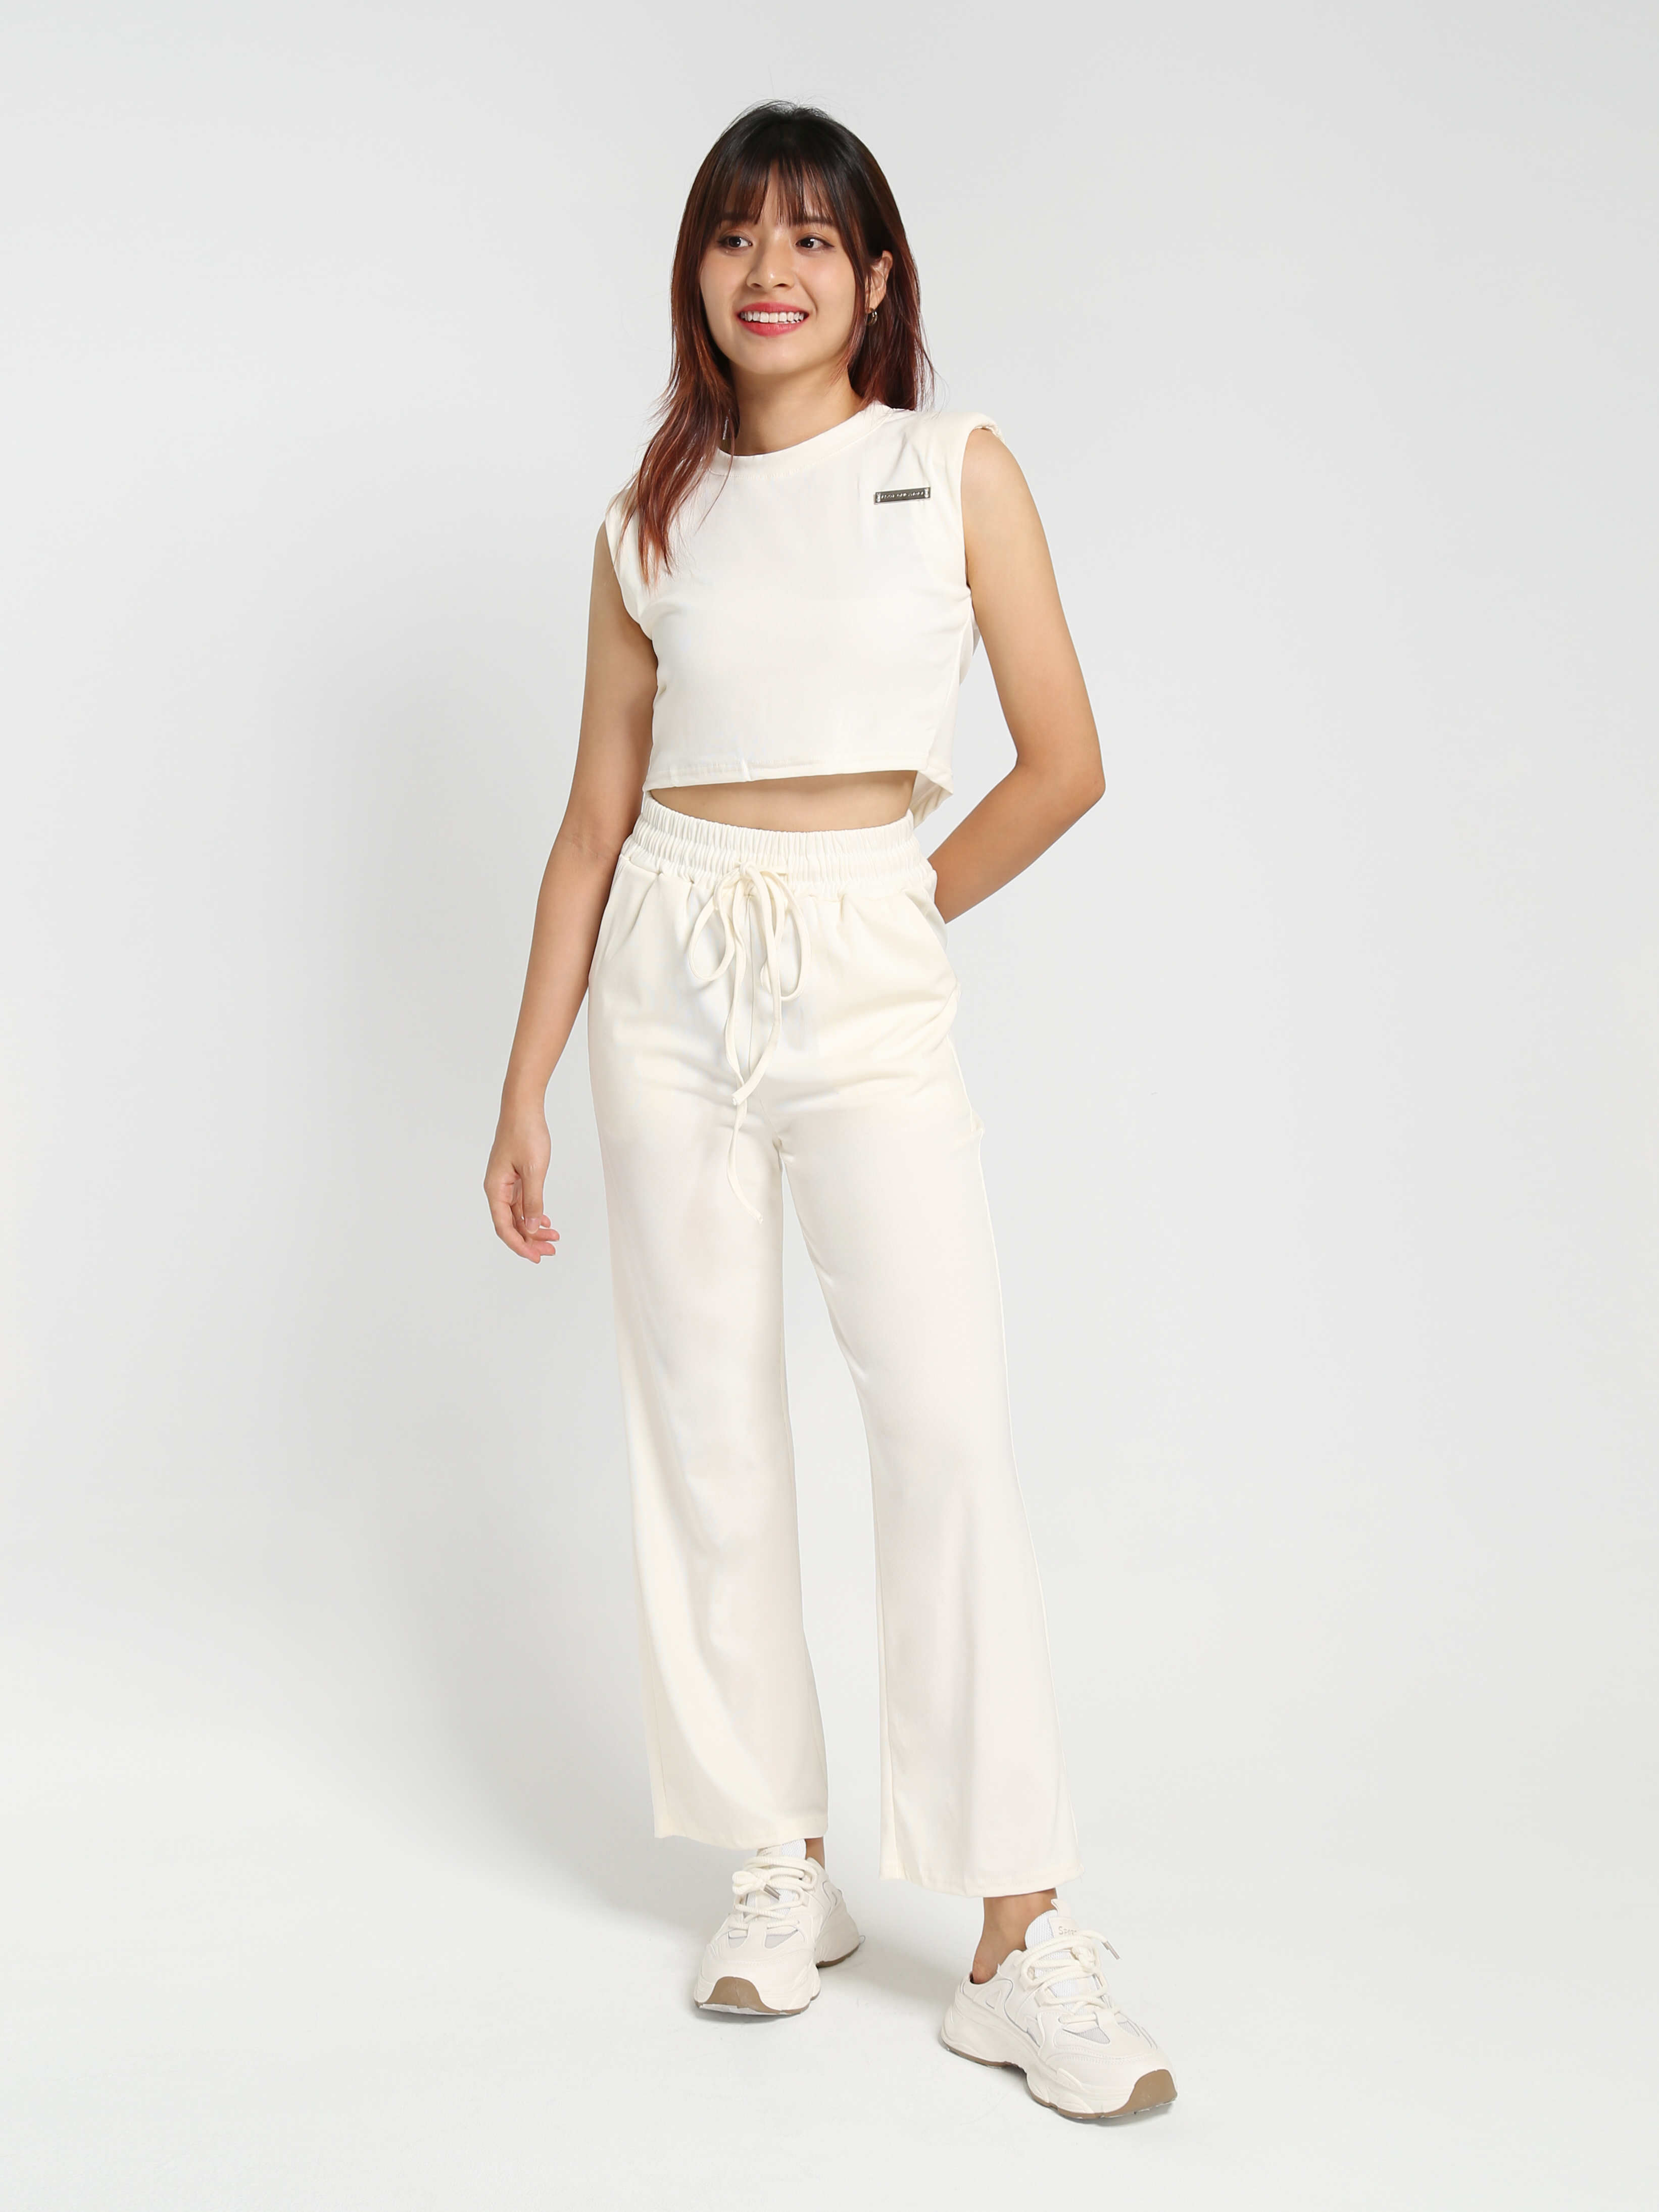 Sleeveless Back Tie Up Top With Long Pants Set 23170